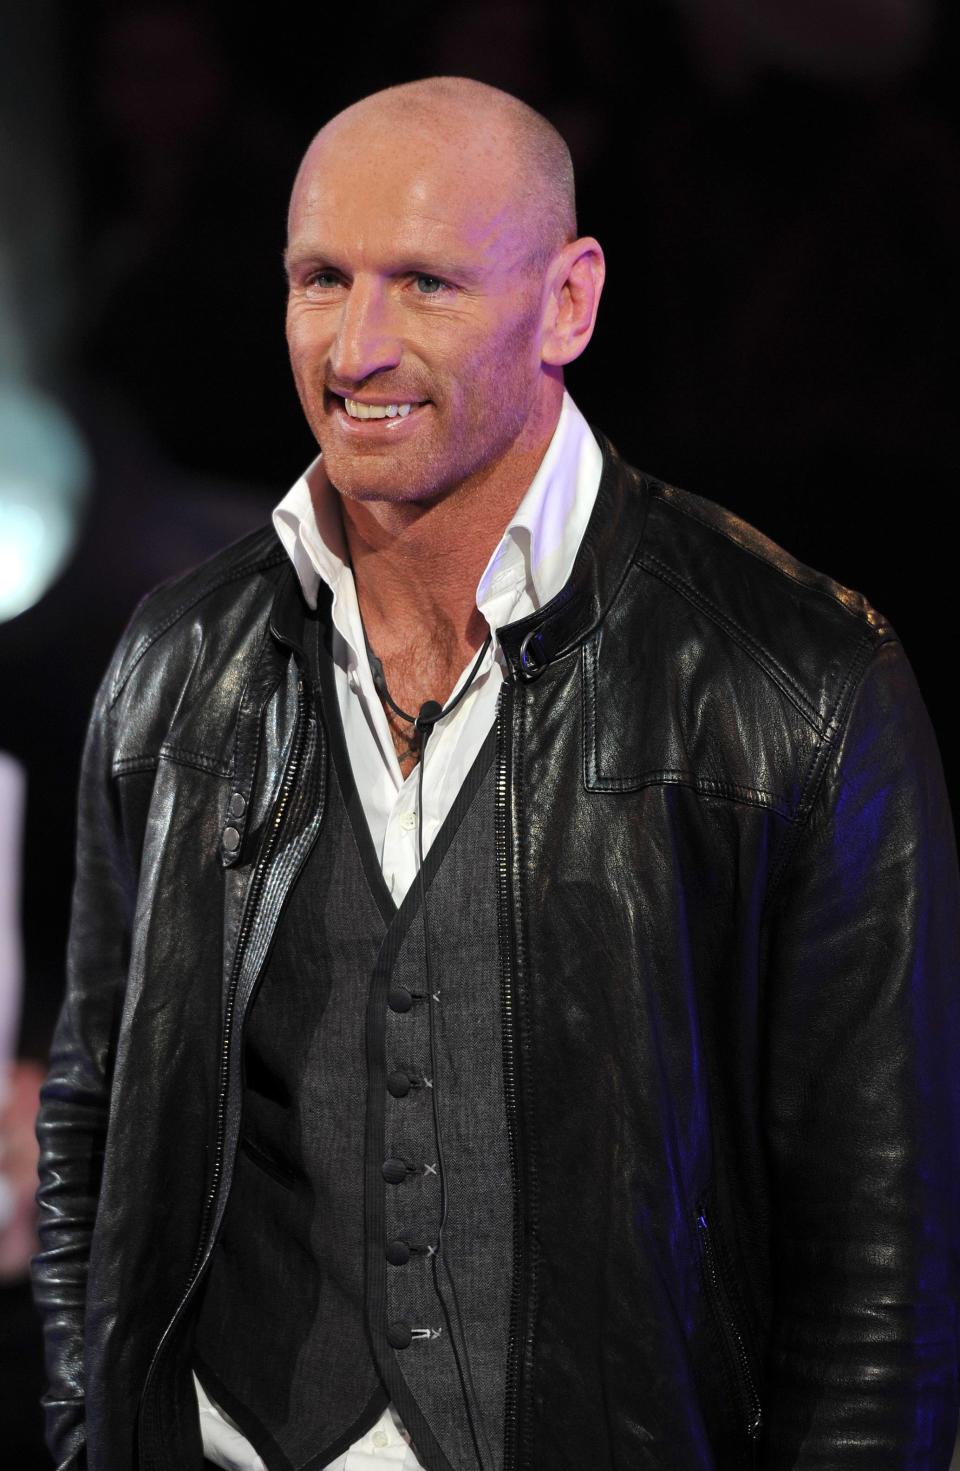 Welsh rugby player Gareth Thomas at CBB launch night.